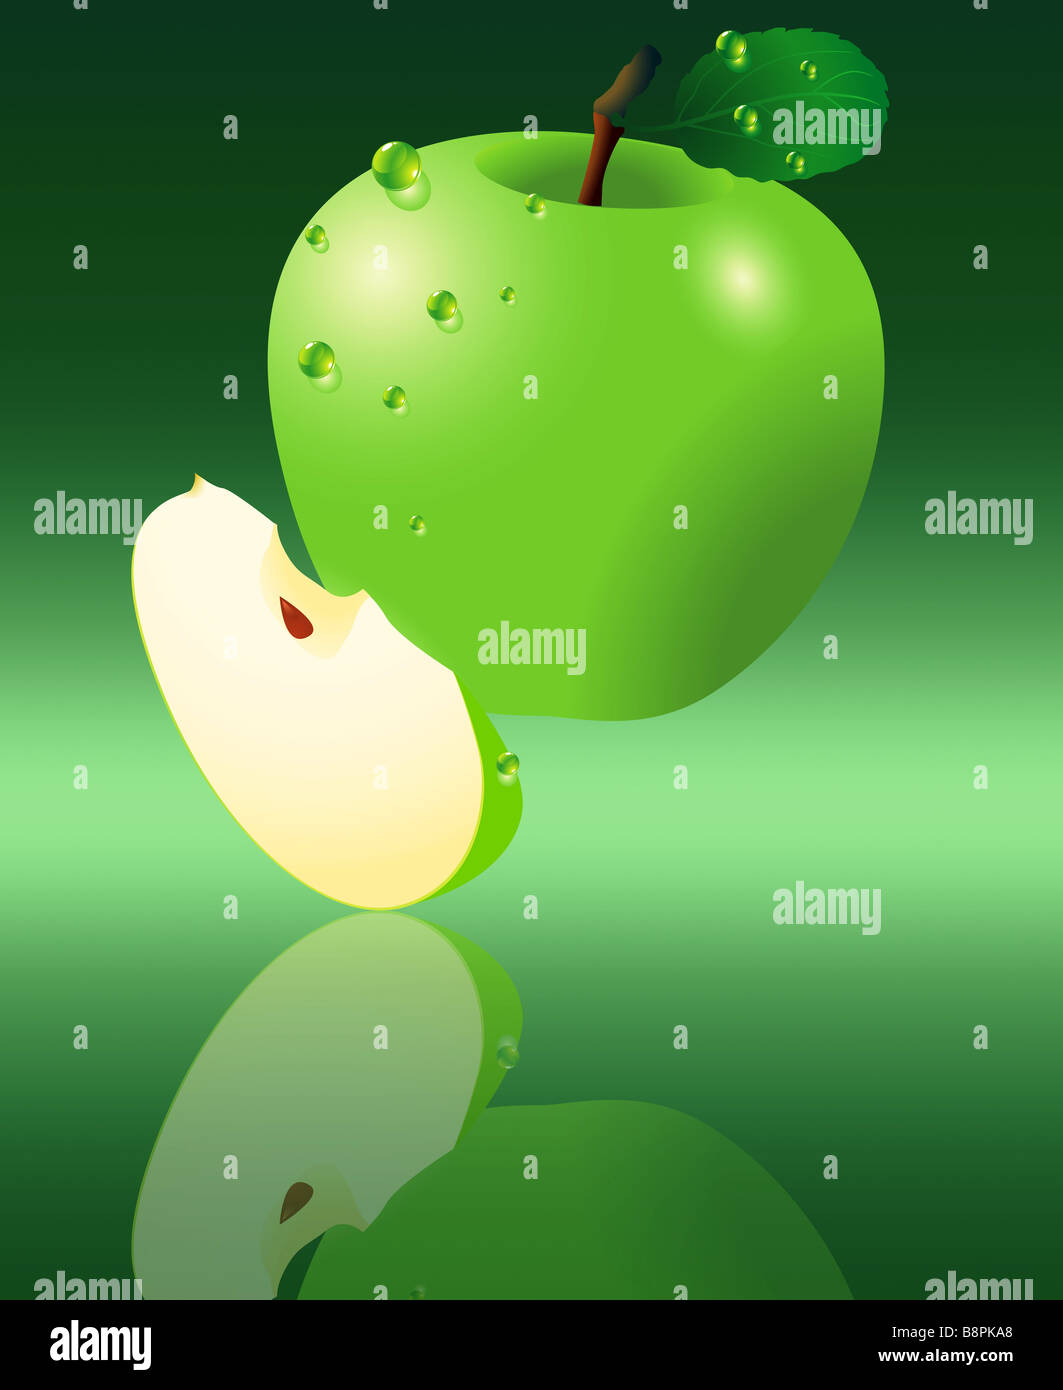 illustration of sliced green apple isolated on green background. Stock Photo